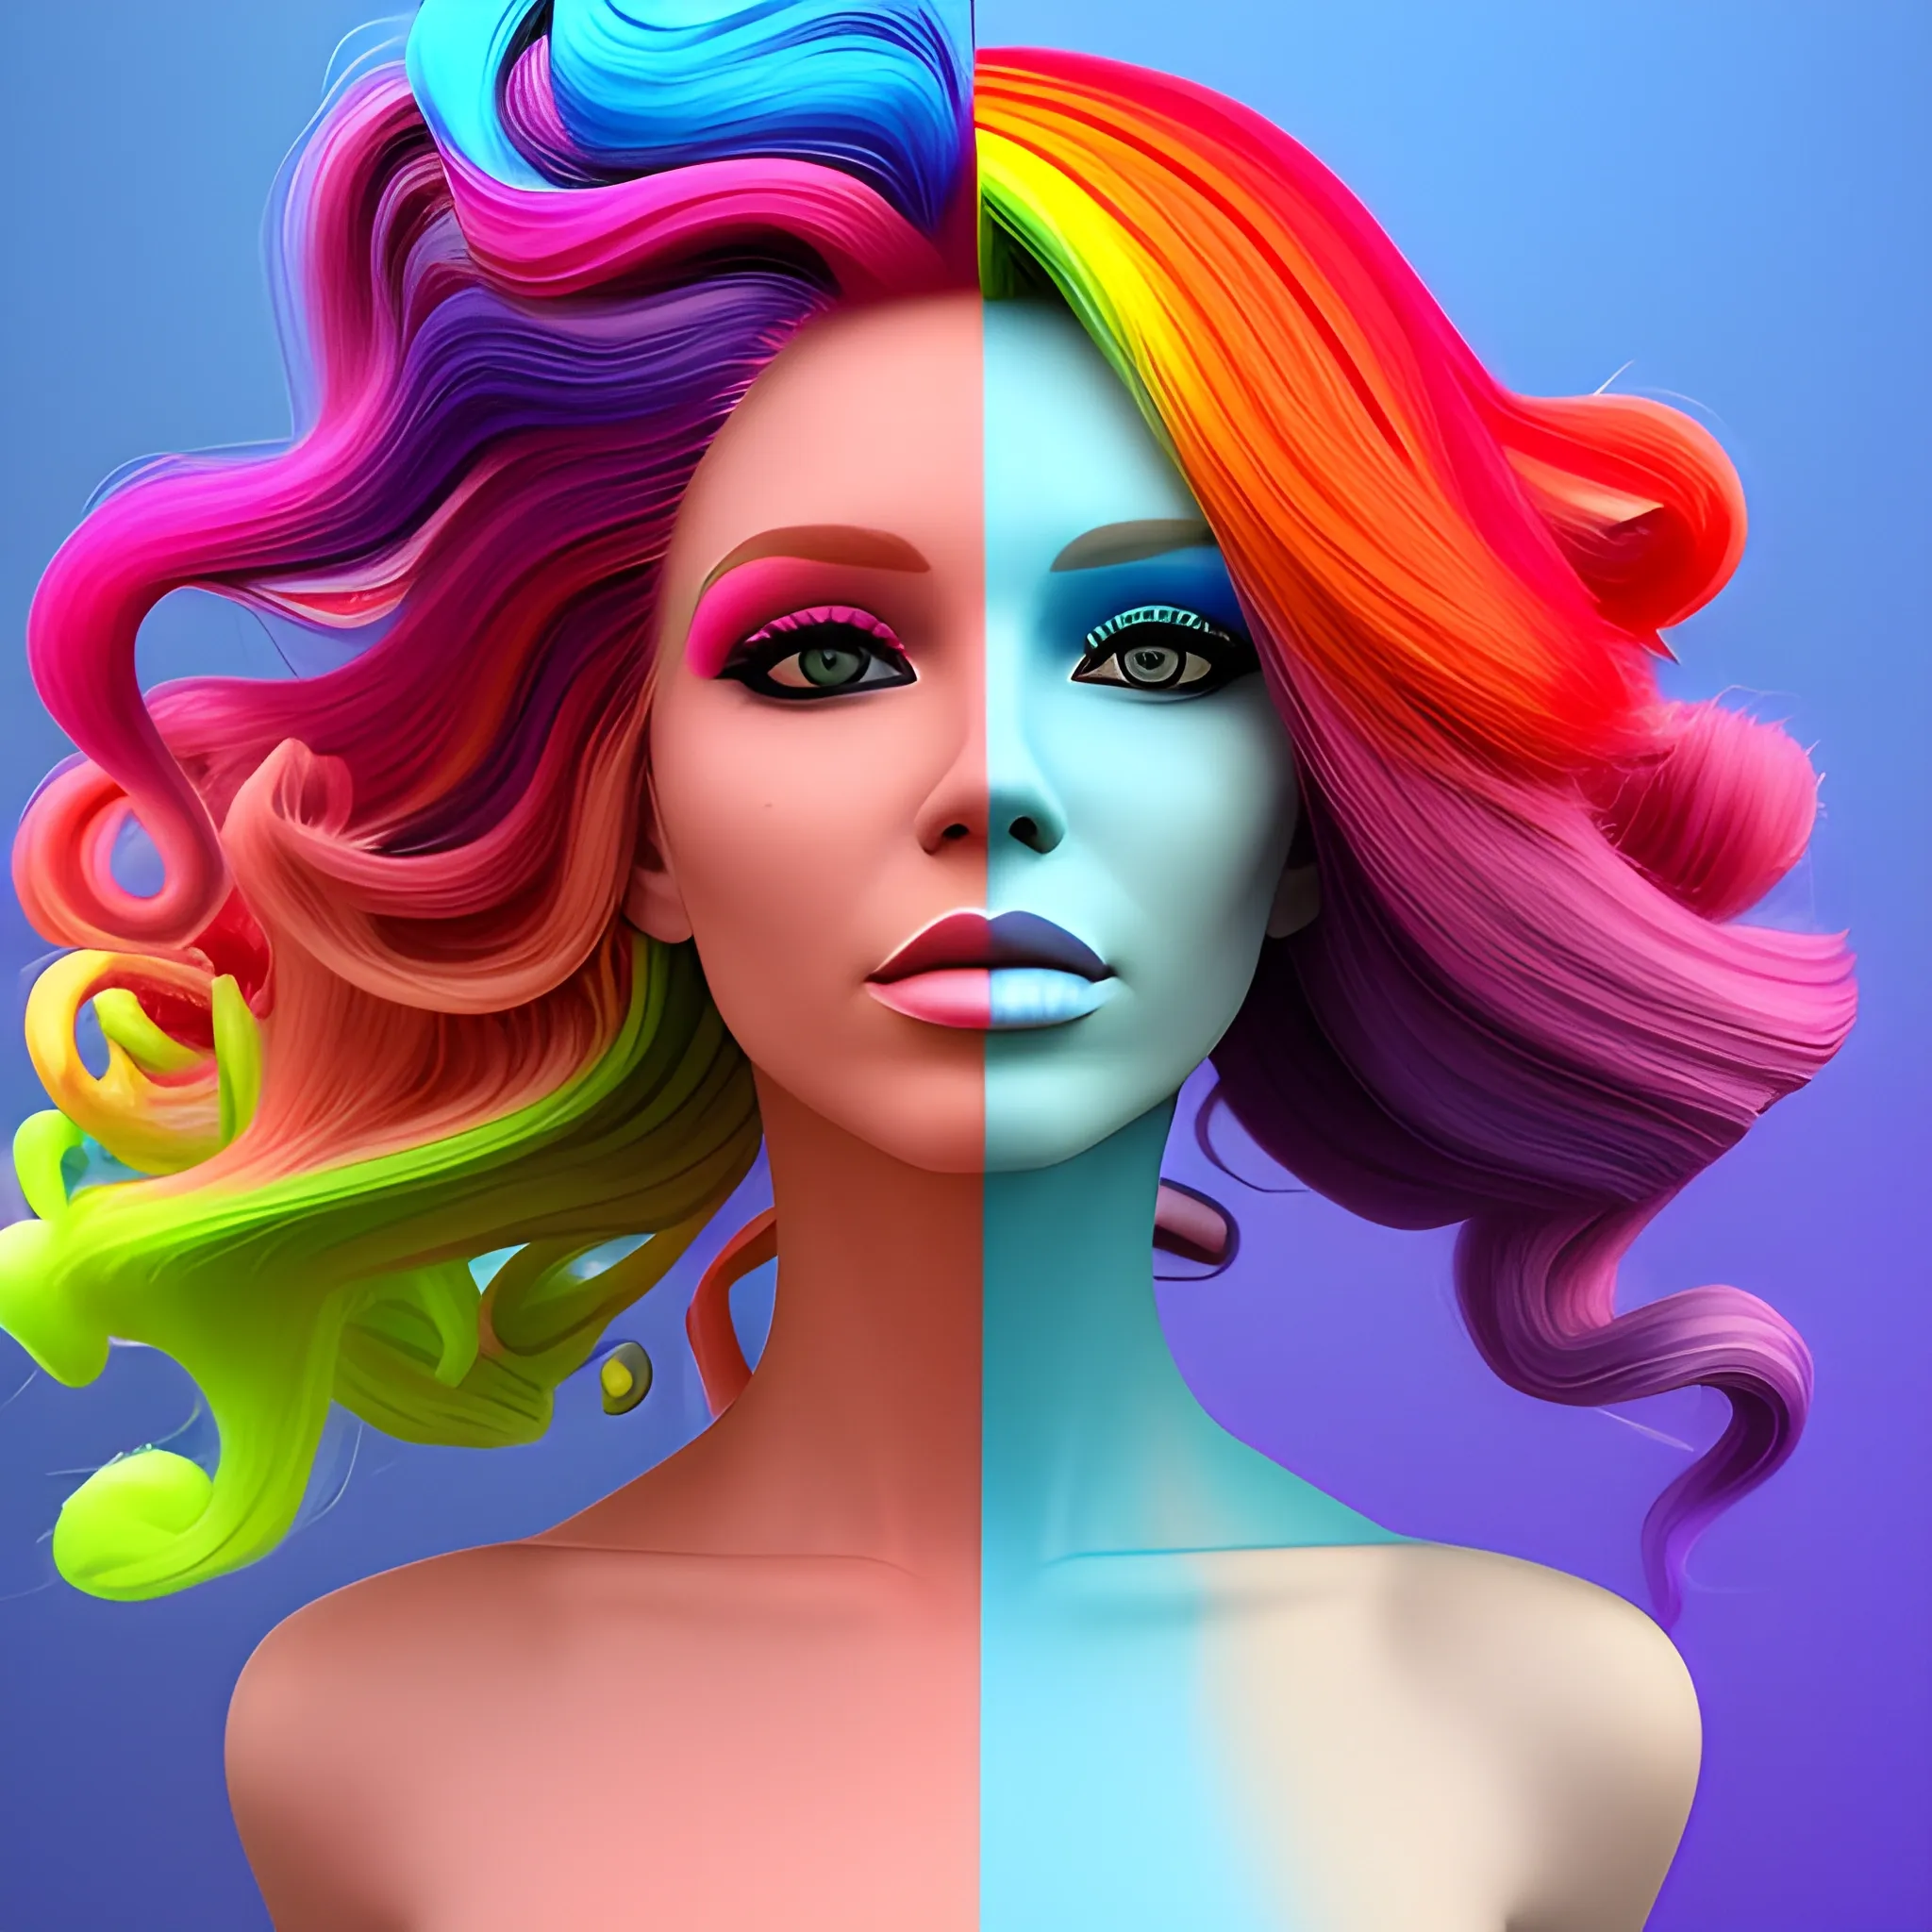 the woman is wearing multicolored hair, vibrant color scheme, , 3D